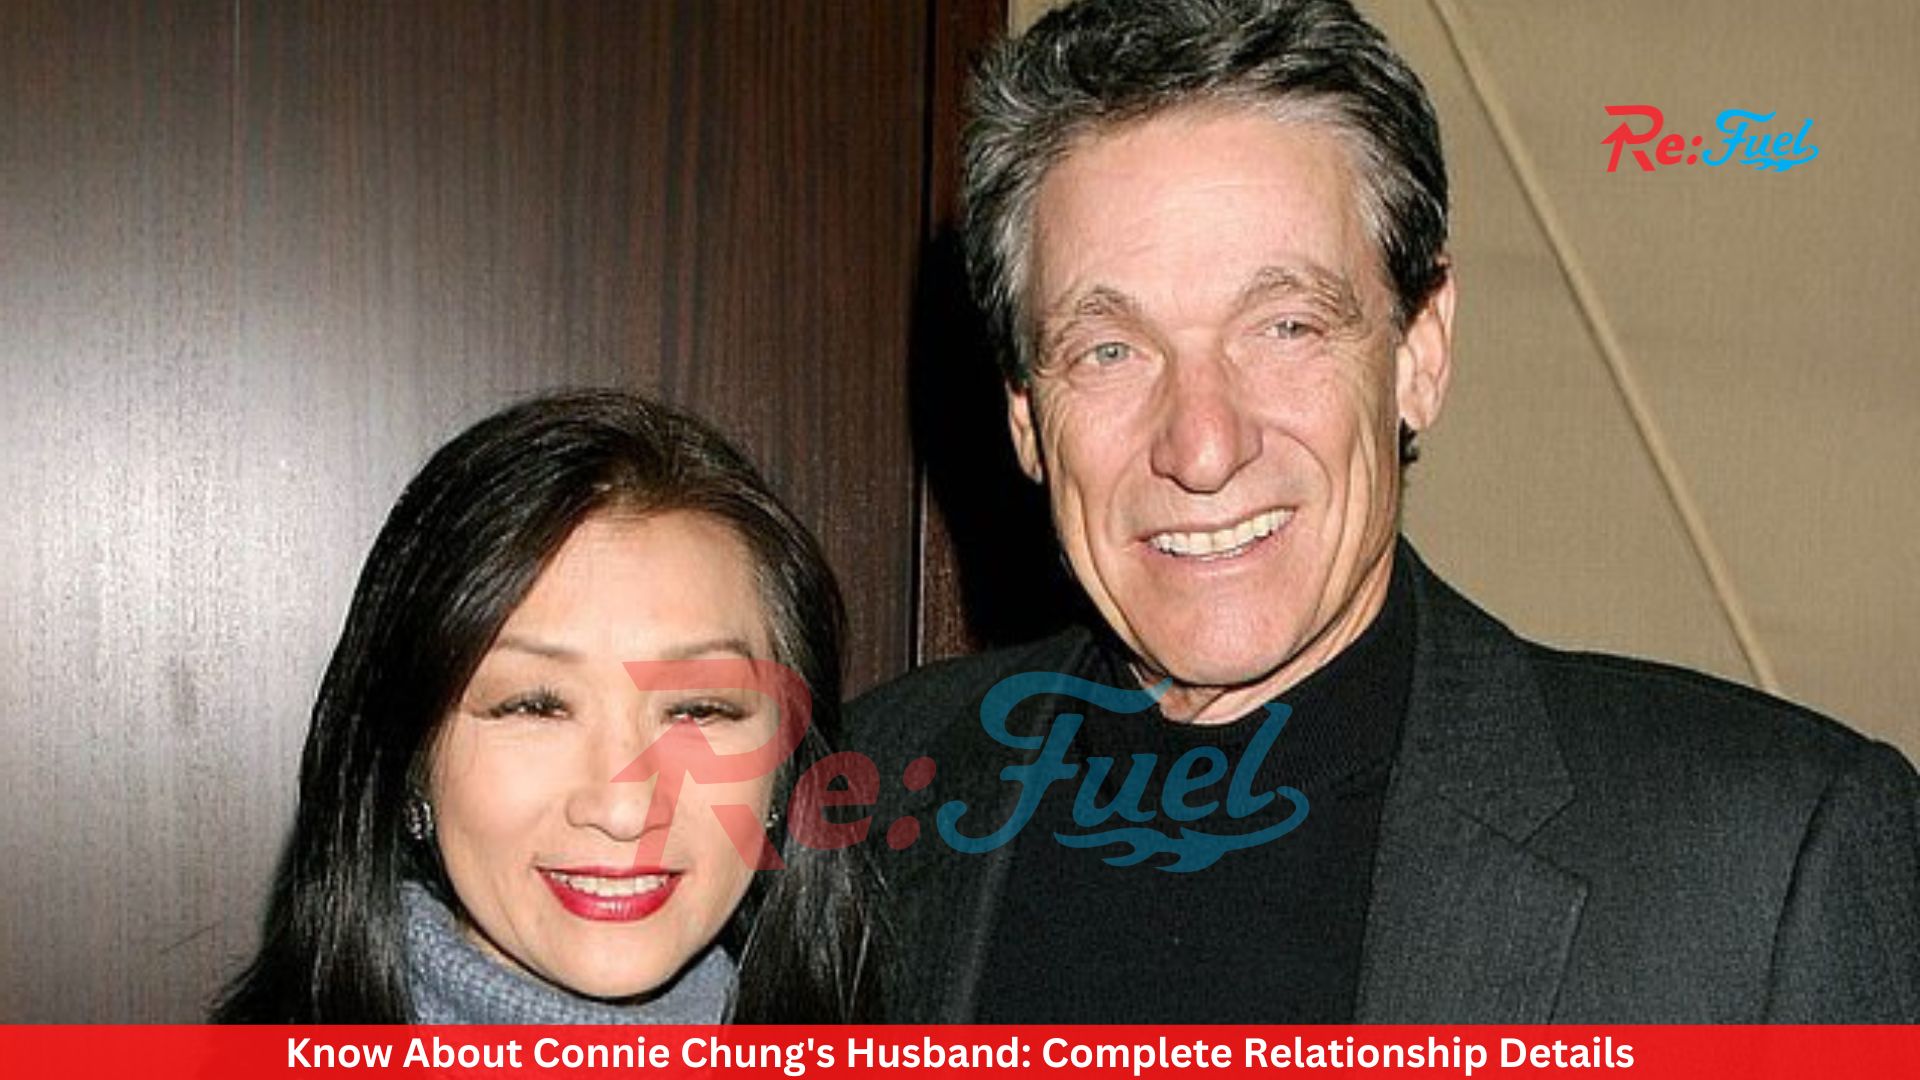 Know About Connie Chung's Husband: Complete Relationship Details